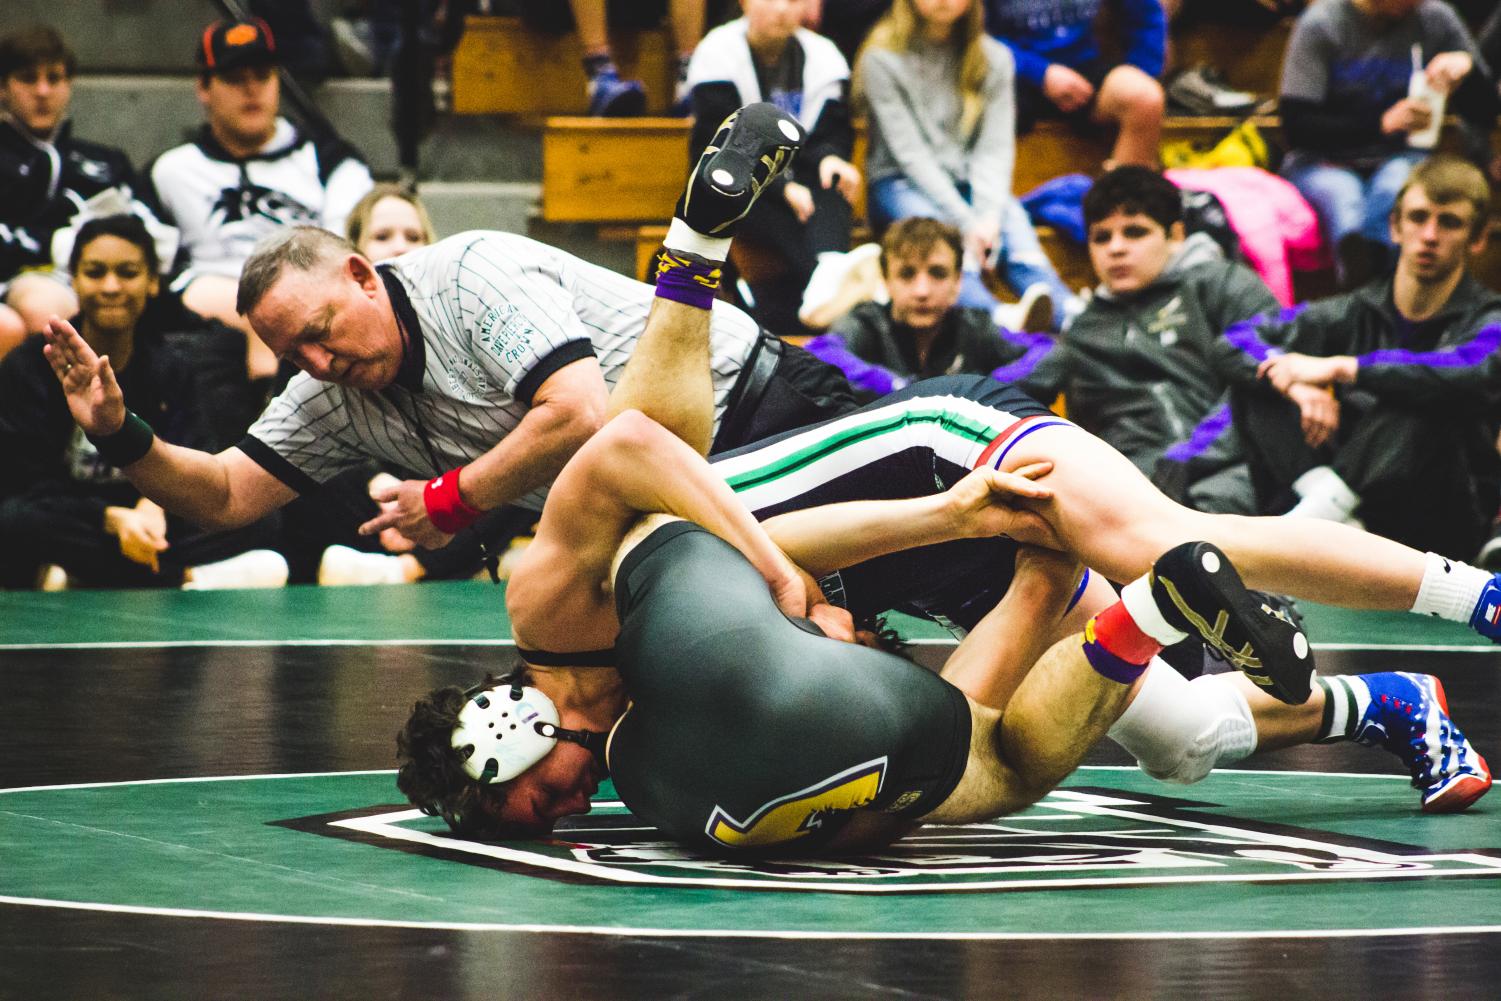 Derby+wrestling+invitational+photo+gallery+%28Photos+by+Tanner+Hopkins%29